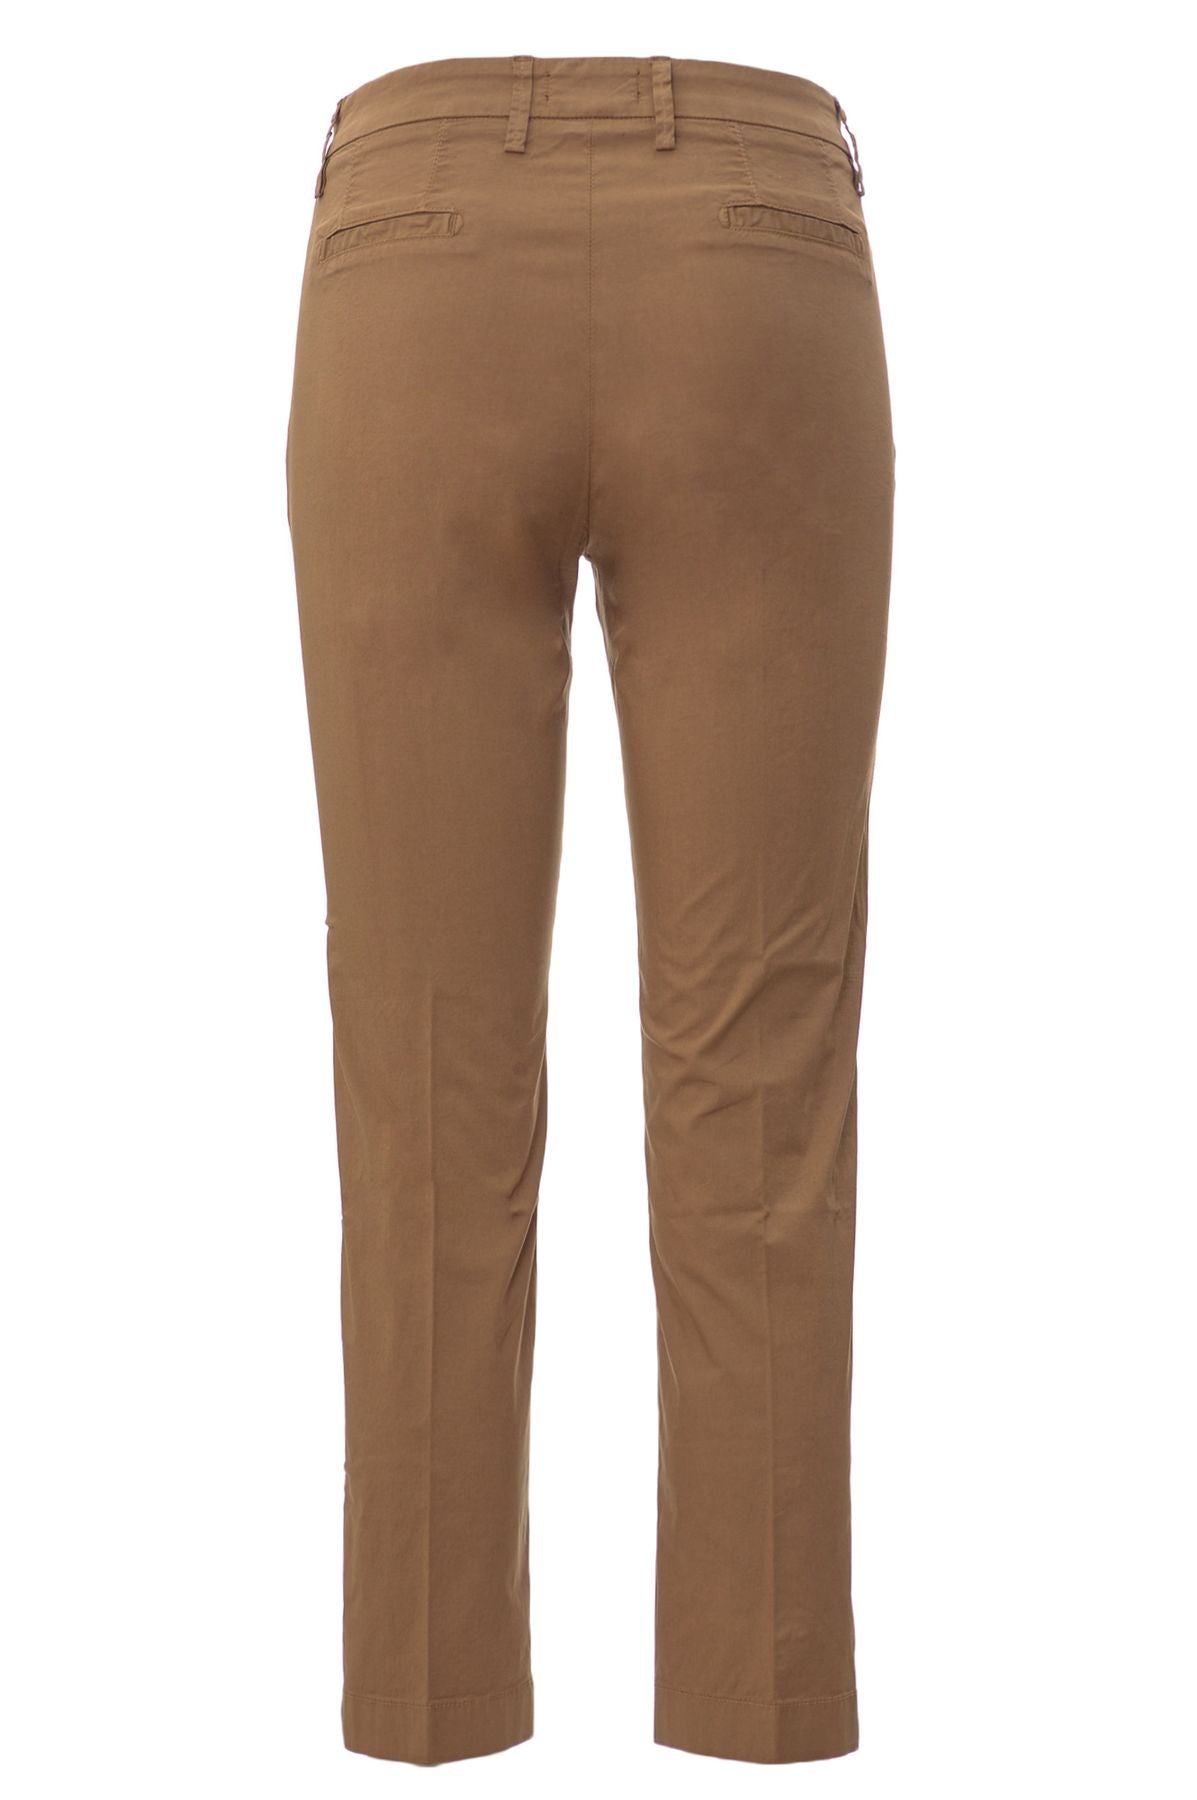 FAY Spring/Summer Cotton Trousers